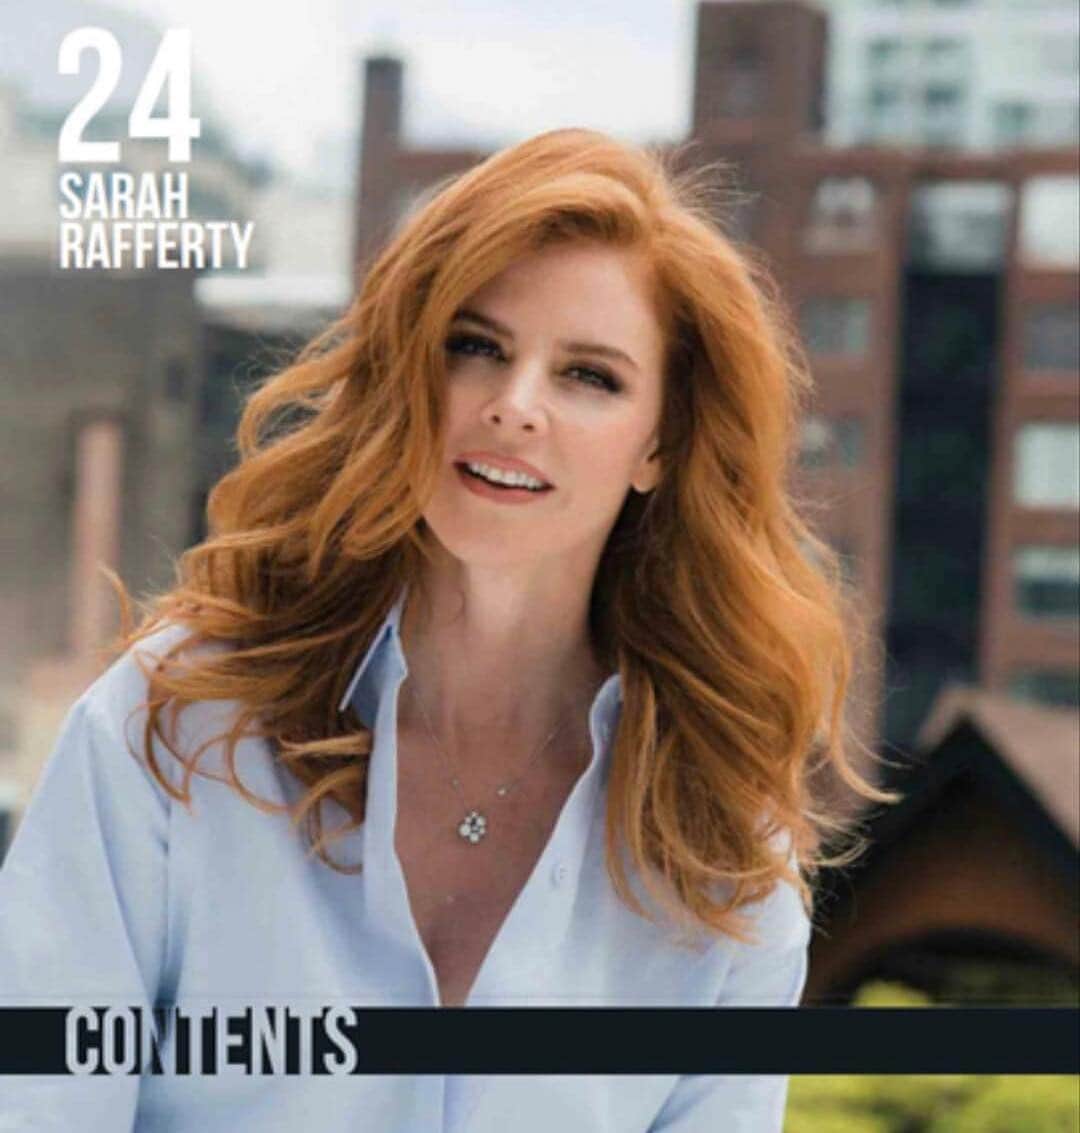 サラ・ラファティさんのインスタグラム写真 - (サラ・ラファティInstagram)「Thank you for the #tbt @irishcountrymag, #RP.  @iamsarahgrafferty, was our cover star for our July | August edition 2017, and we have decided to revisit that amazing cover shoot in Toronto as the actress discussed her Irish family, Suits and campaigning for women. “There’s a lot going on with the Rafferty side but my other grandparents were Flaherty and McAllister. It’s a lot of Irish blood going all the way back.” “The whole Irish hospitality thing is so real. I went around the corner to the pub...people kept saying: ‘Can I get you a drink?’ I was saying: ‘No, no I couldn’t possibly.’ And they were insisting: No I’m going to get you a drink.’ By the end of the night, I’m at my little table for one, and there’s like nine pints on it.” On her suits character, Donna: “I’ve learned a lot about confidence from her.” “It’s the best job I’ve ever had…This has been so fulfilling, because the crew is like family…It’s not like when I was bouncing around before, being a guest on another show - you can never fully relax. Here, its home.” When Sarah’s daughter asked her how was her day at work: “I said: ‘You know it was a really great day. We shot a scene where Donna had to be very brave and speak up for herself and ask for something that she needs and believes she has worked for’. She went: ‘Awesome, Mommy. Girl Power.' “I work with @plancanada on the ‘Because I am a Girl’ campaign, which works to raise girls and women out of poverty in developing countries. I had the privilege of going to Ghana with them in March, so I could really see the work they’re doing.” “They are training a lot of people. I’ve seen some of the programmes that they had in place for 10 years and had an opportunity to talk to women about what they’ve seen change.” “Now the women have the opportunity to start businesses. They have banking systems in their villages that are all female-run. They get to make their own money. The empowerment is happening, so it’s really wonderful.”」6月8日 6時19分 - iamsarahgrafferty